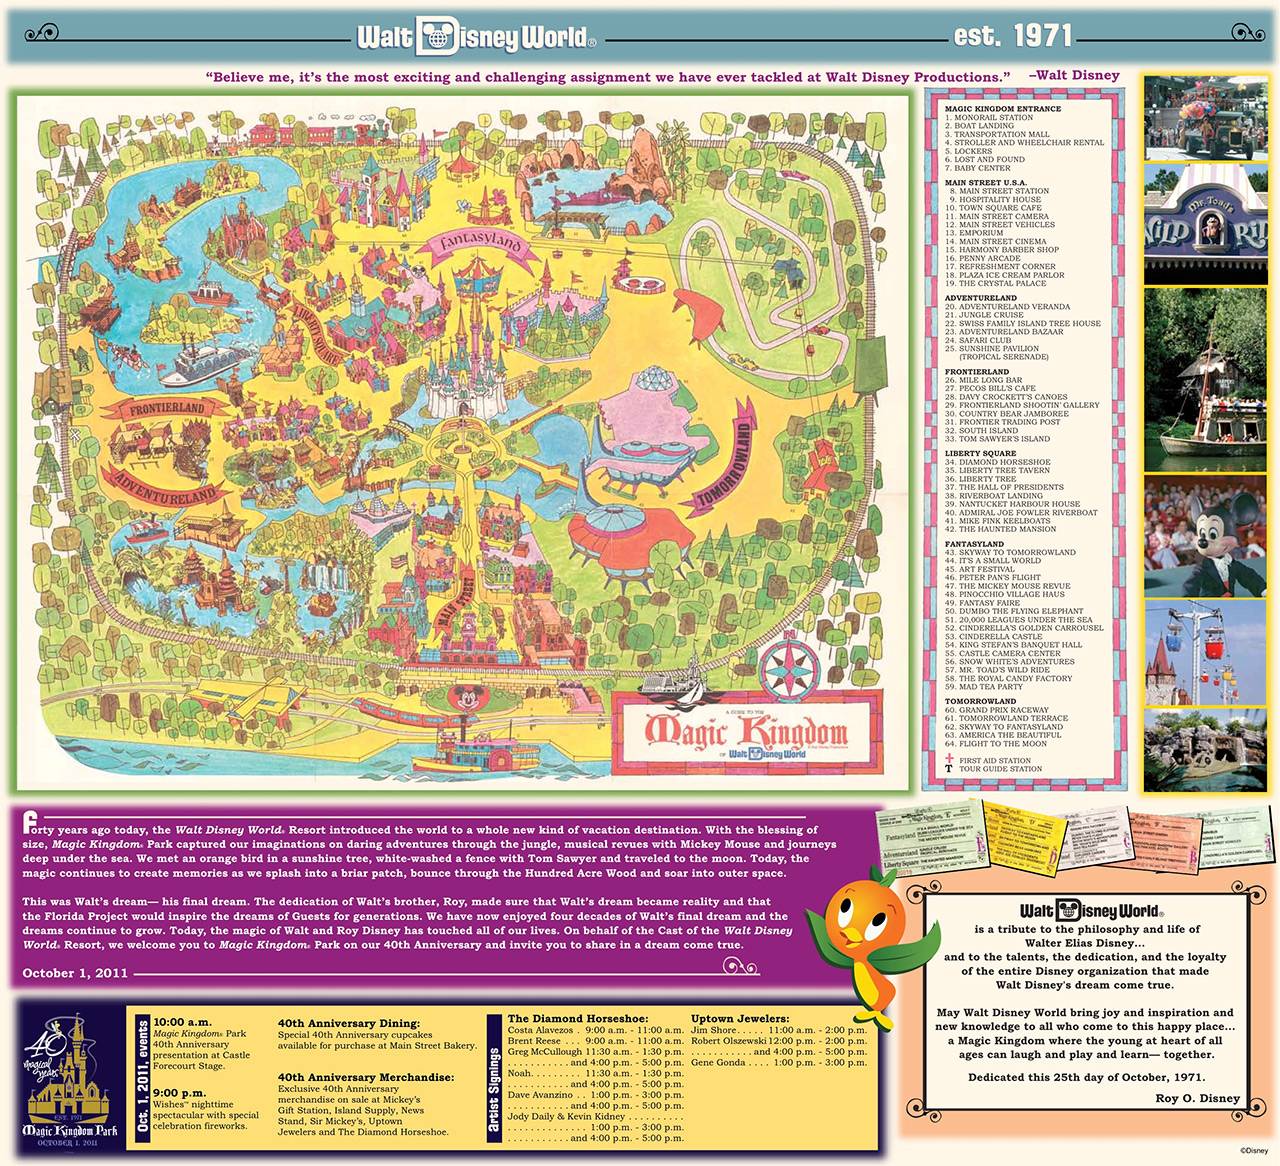 Special vintage edition of the park’s guidemap. Copyright 2011 The Walt Disney Company.